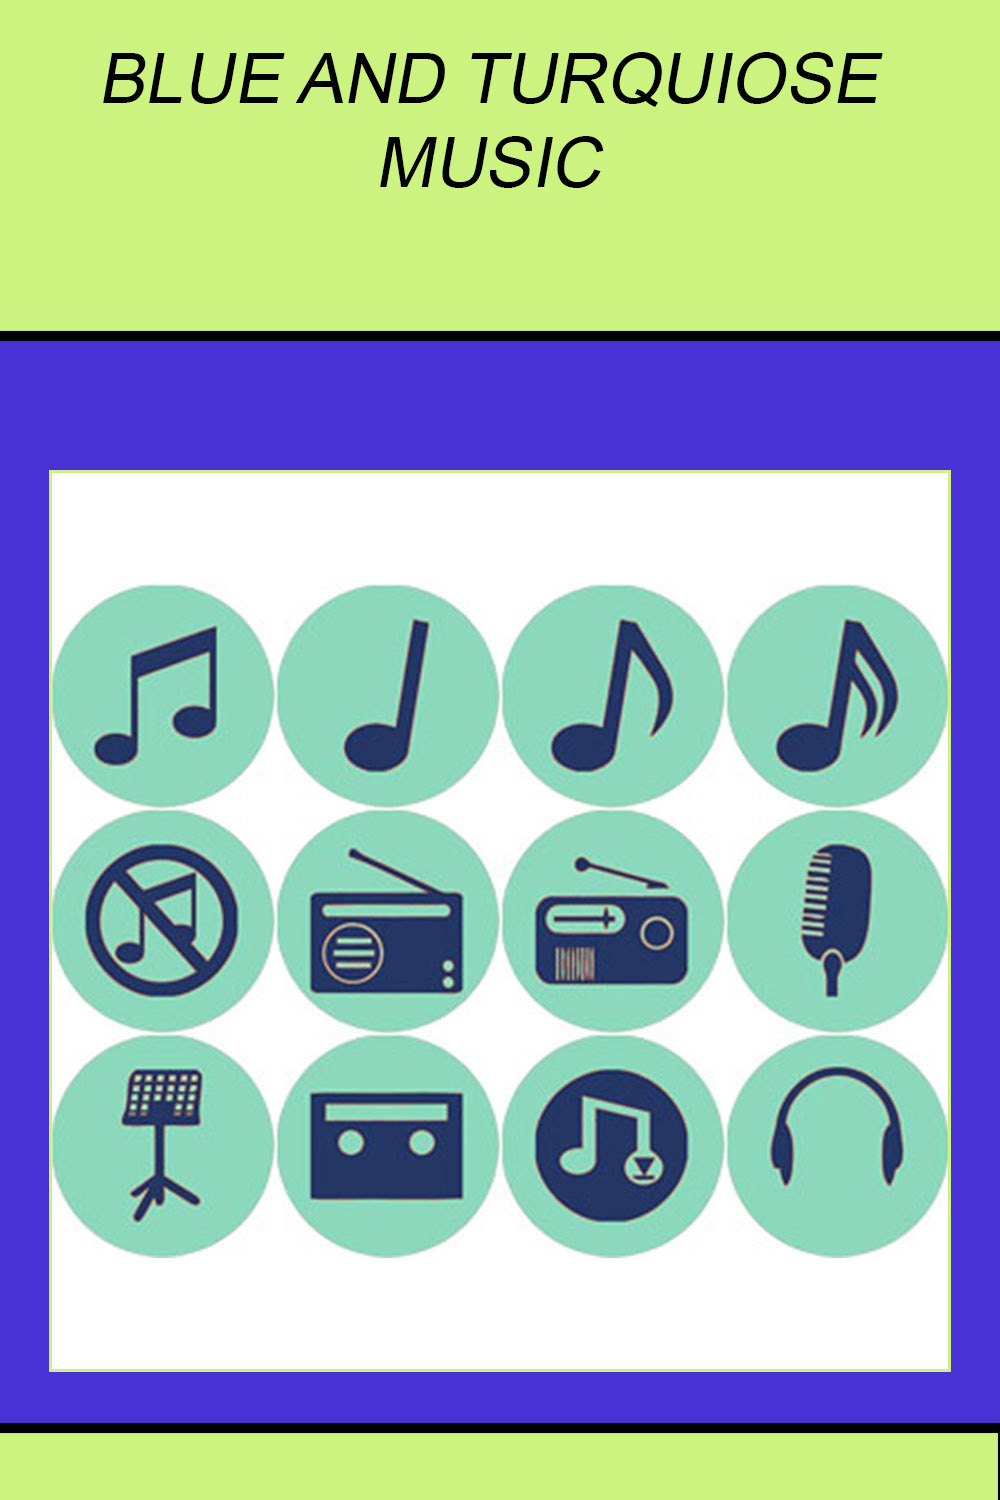 BROWN AND MUSTARD YELLOW MUSIC ICONS pinterest preview image.